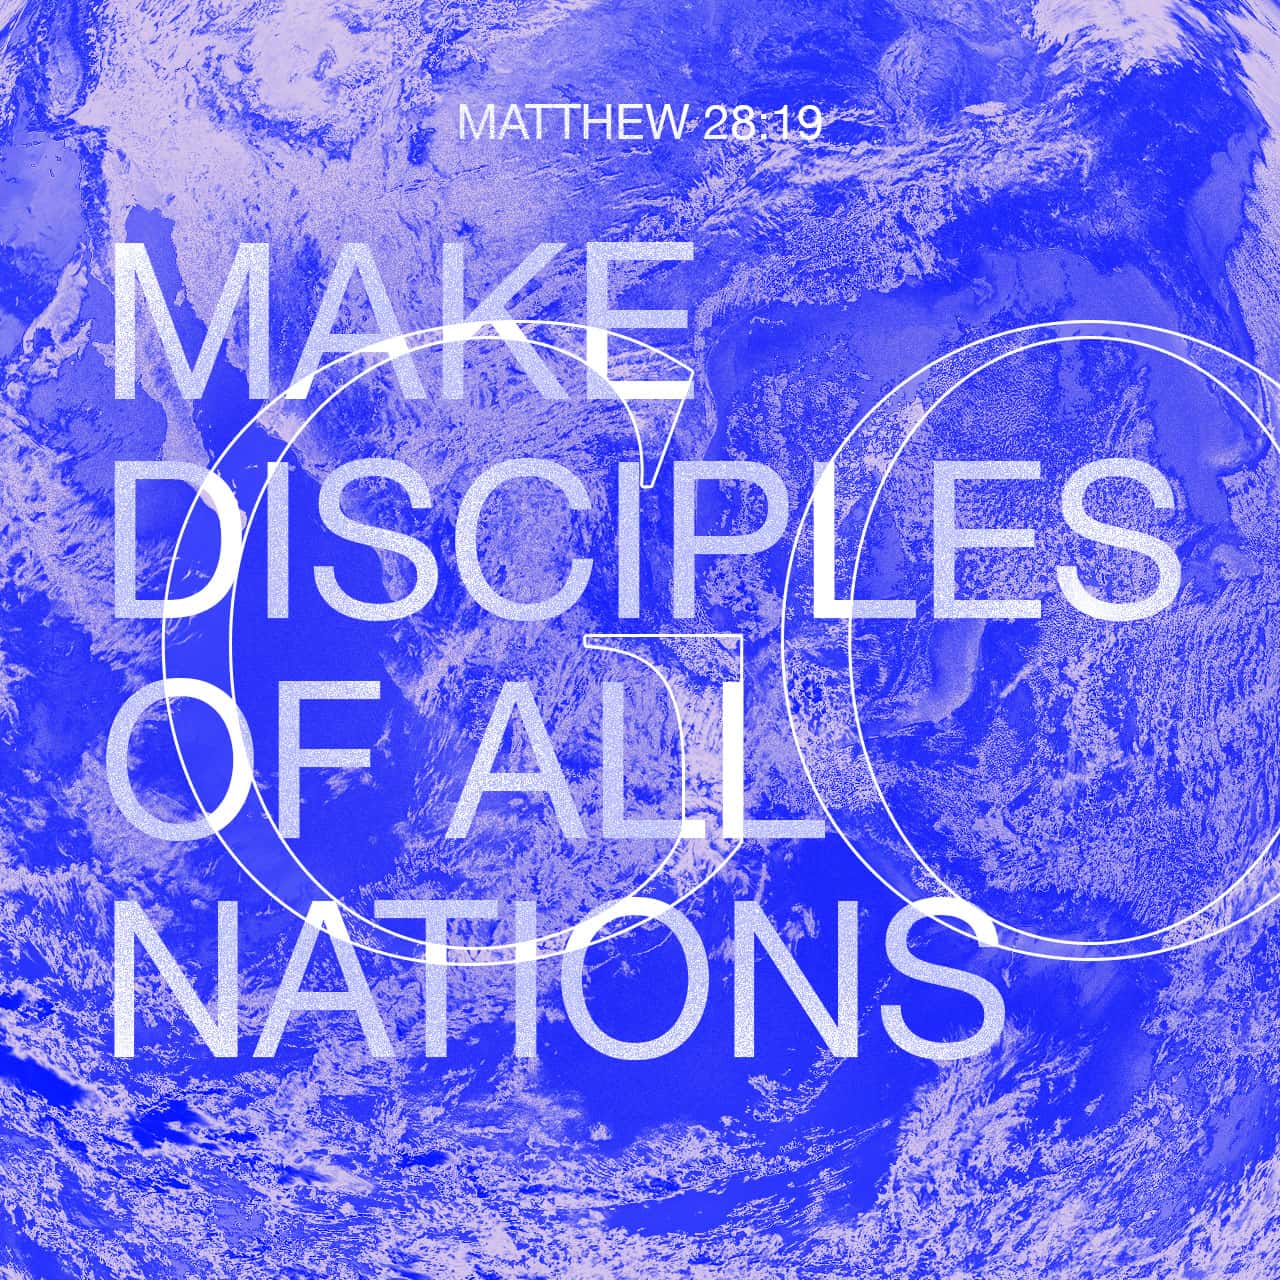 Matthew 28:19 Go ye therefore, and teach all nations, baptizing them in the name of the Father, and of the Son, and of the Holy Ghost | King James Version (KJV) | Download The Bible App Now